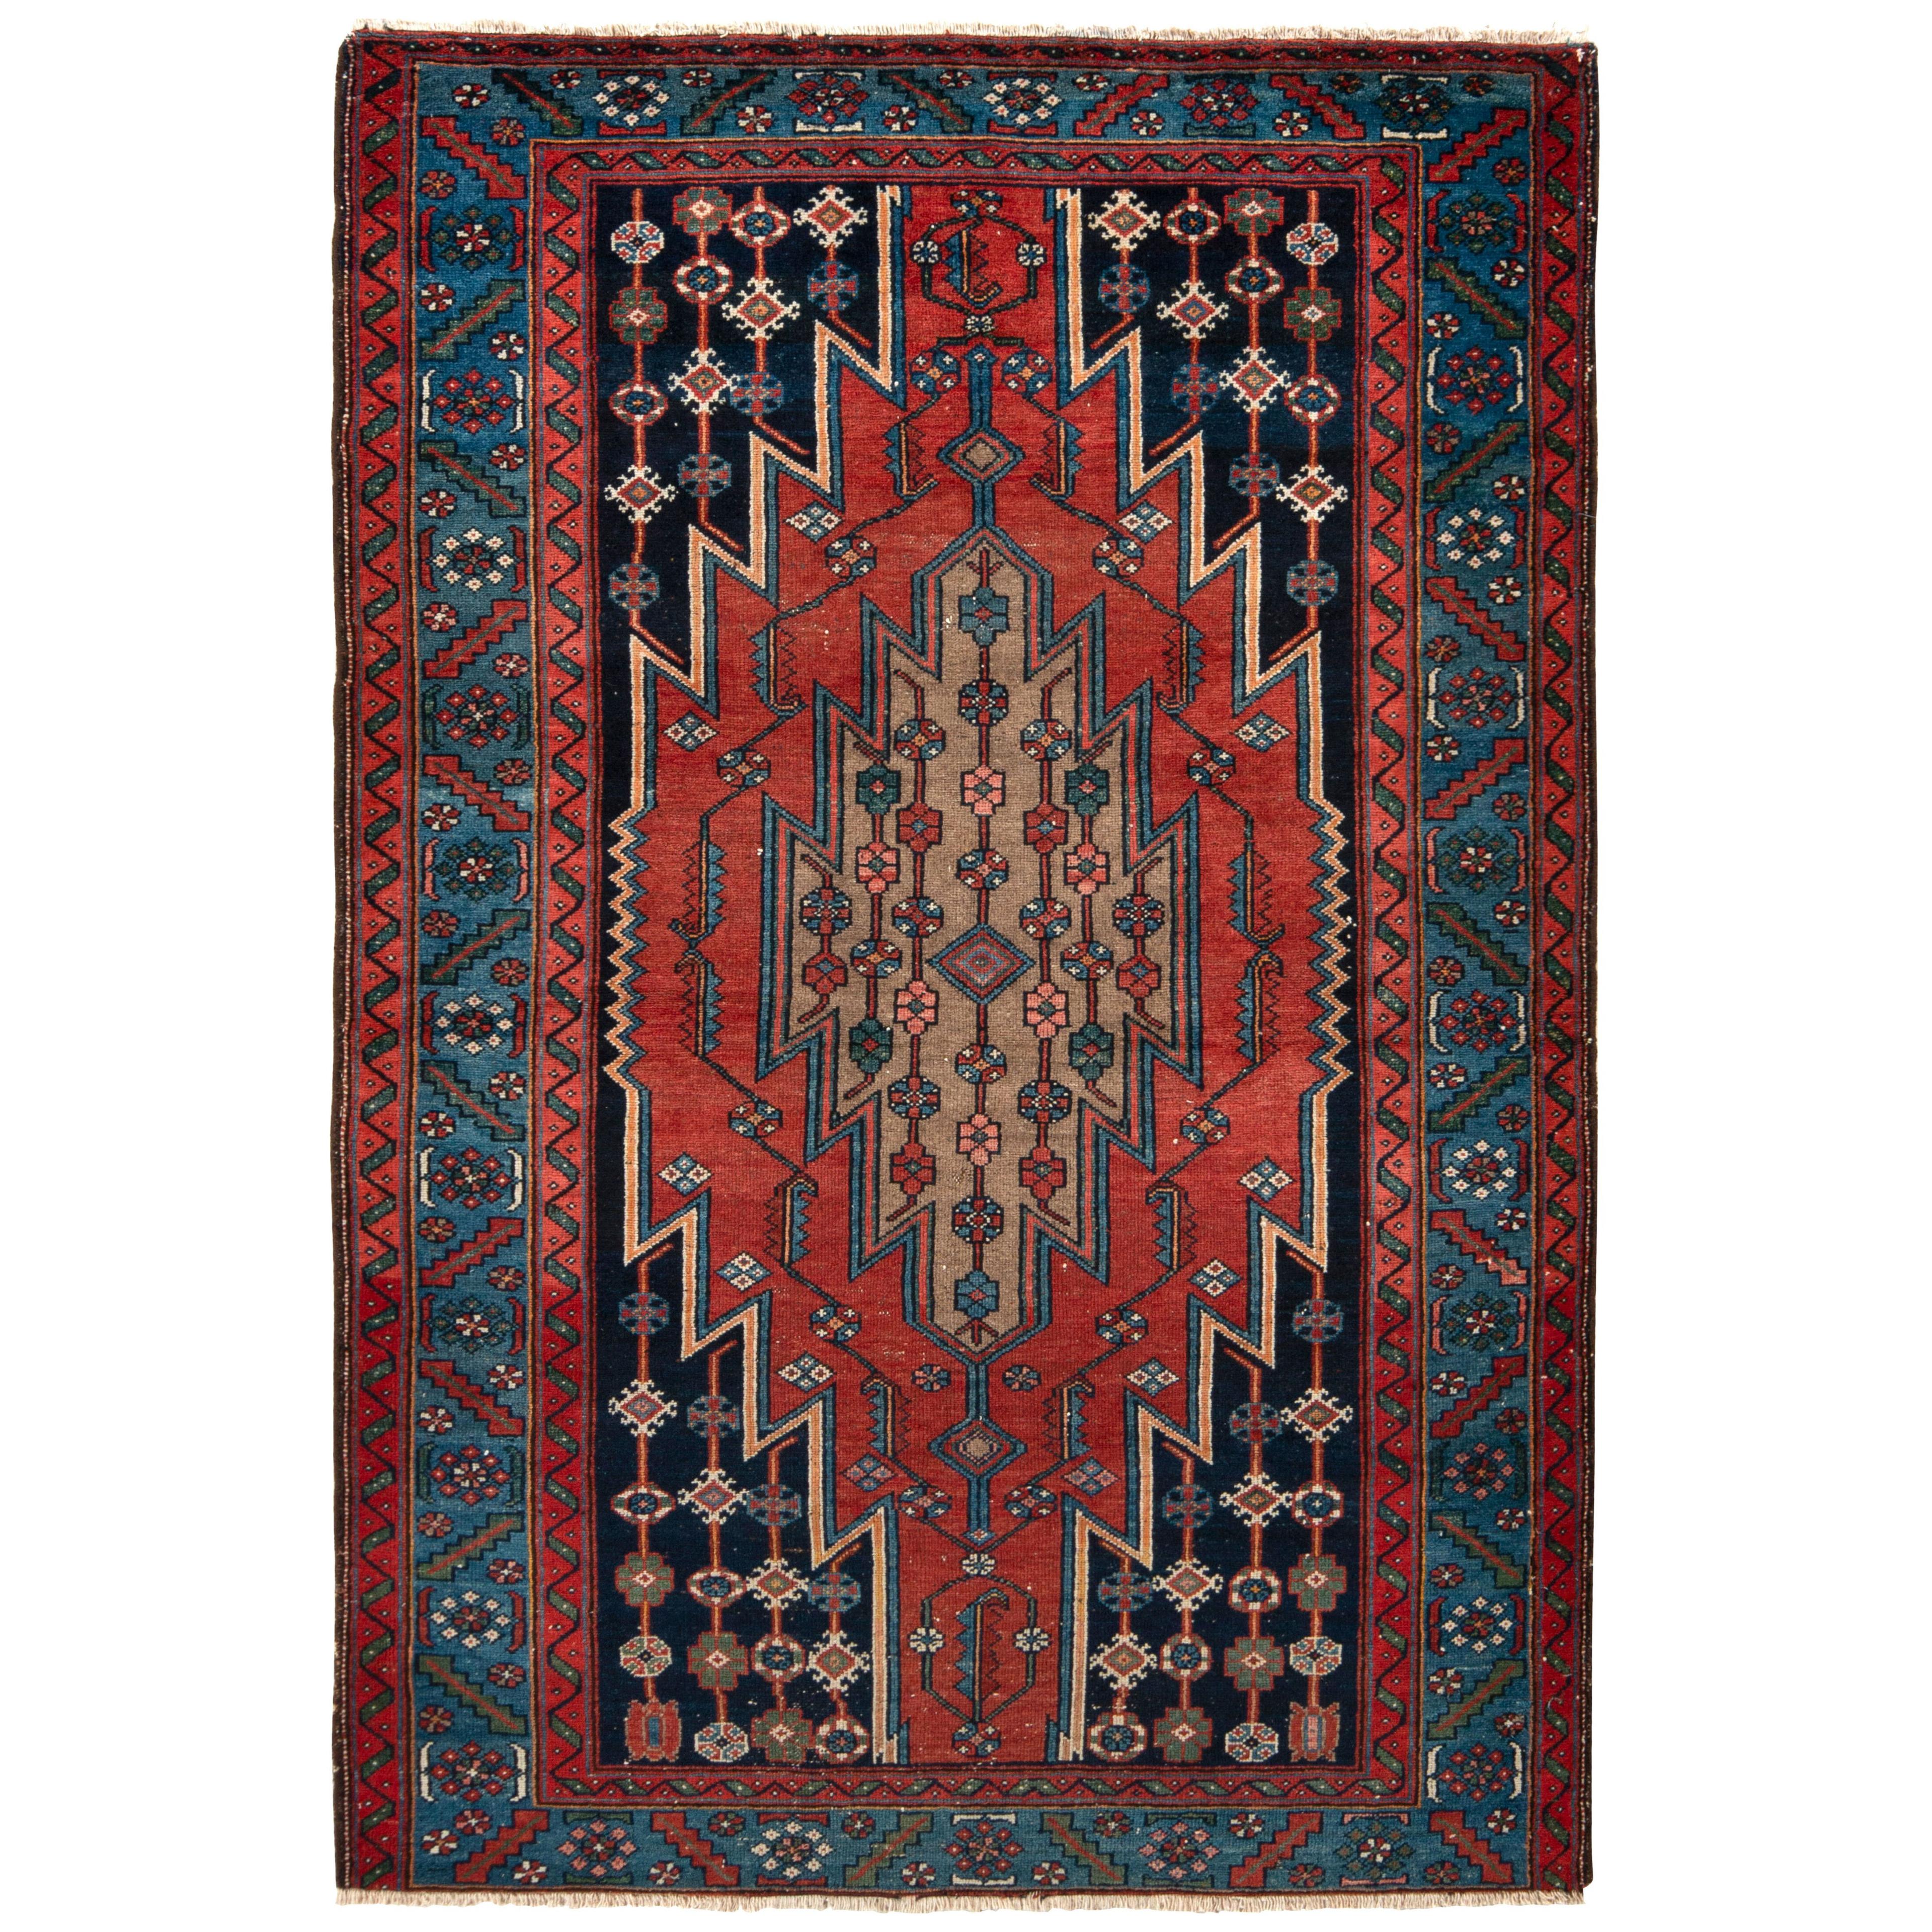 Hand-knotted Antique Mazlaghan Persian Rug in Red and Blue Medallion Pattern